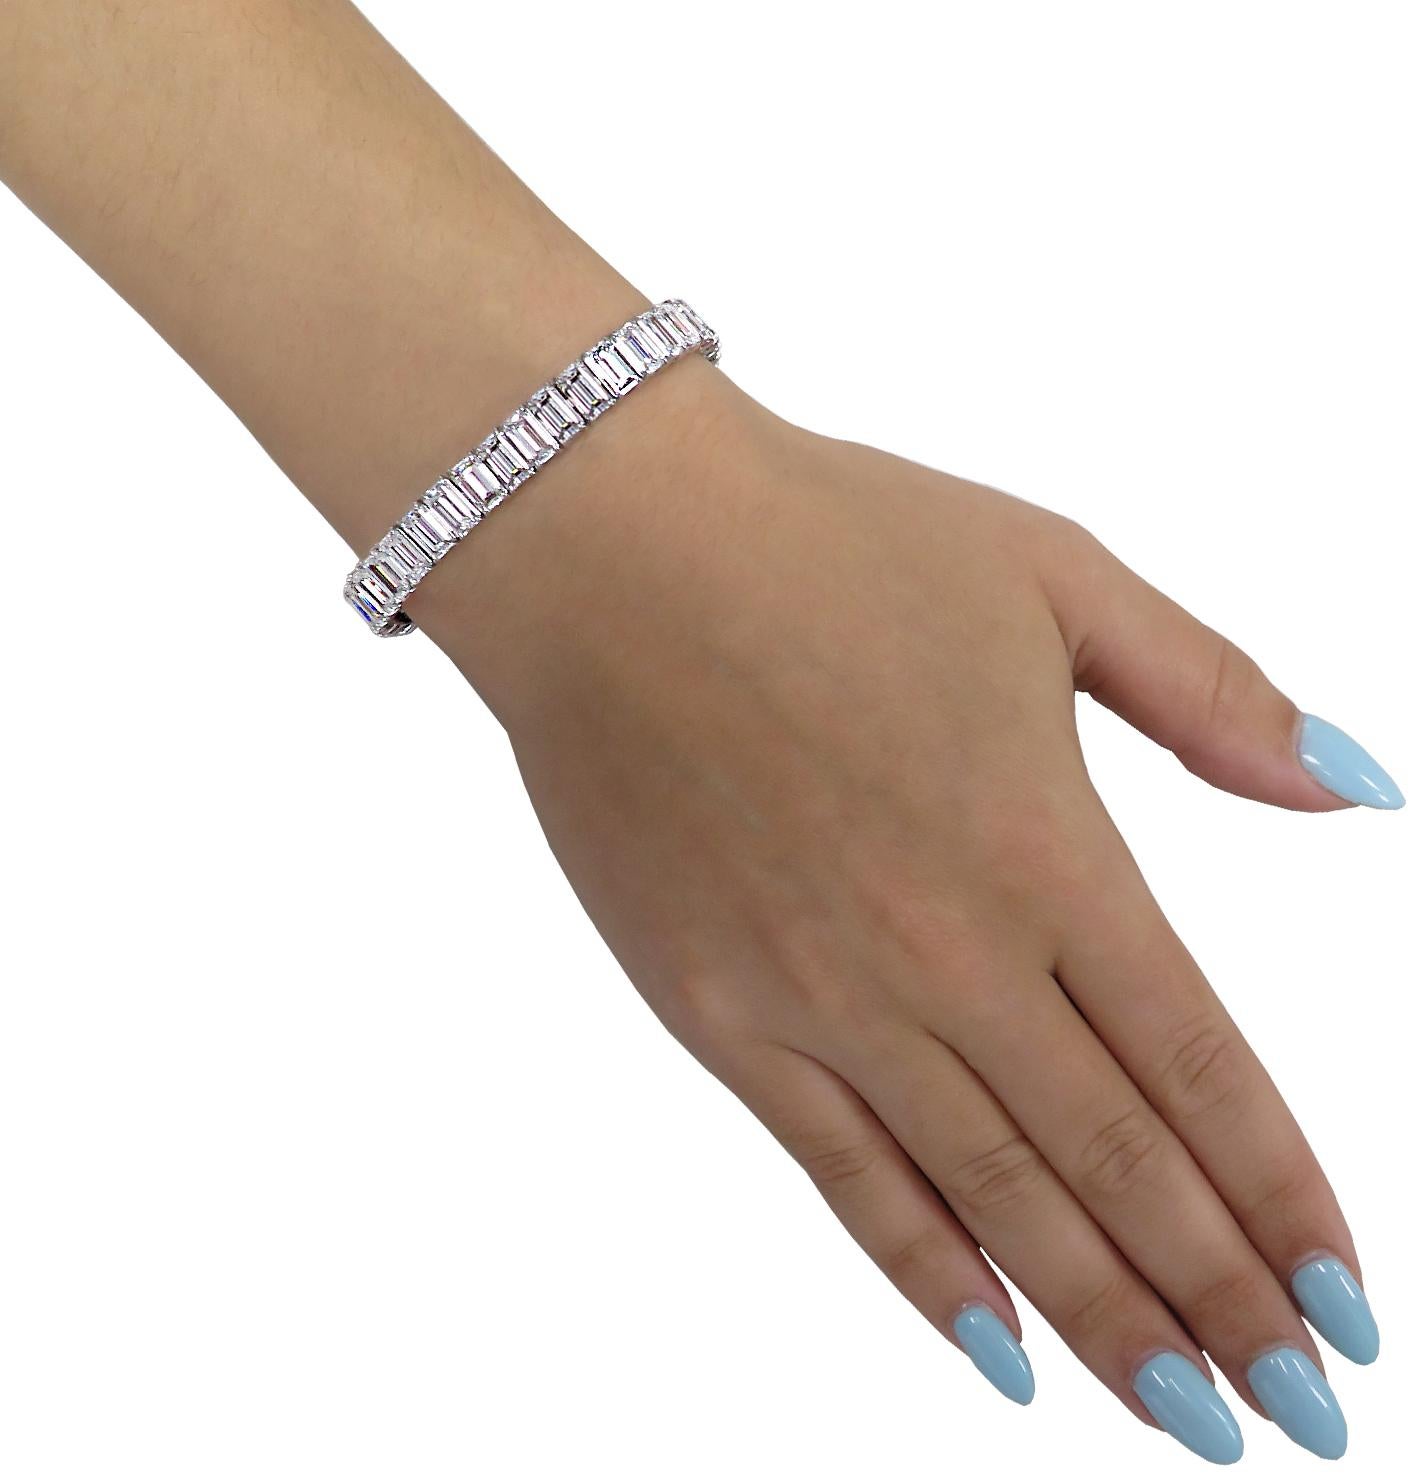 Scintillating Vivid Diamonds Emerald Cut diamond bracelet expertly crafted in platinum, showcasing 40 spectacular GIA Certified emerald cut diamonds weighing 31.9 carats total, D-H color, IF-VS2 clarity. Each diamond was carefully selected,